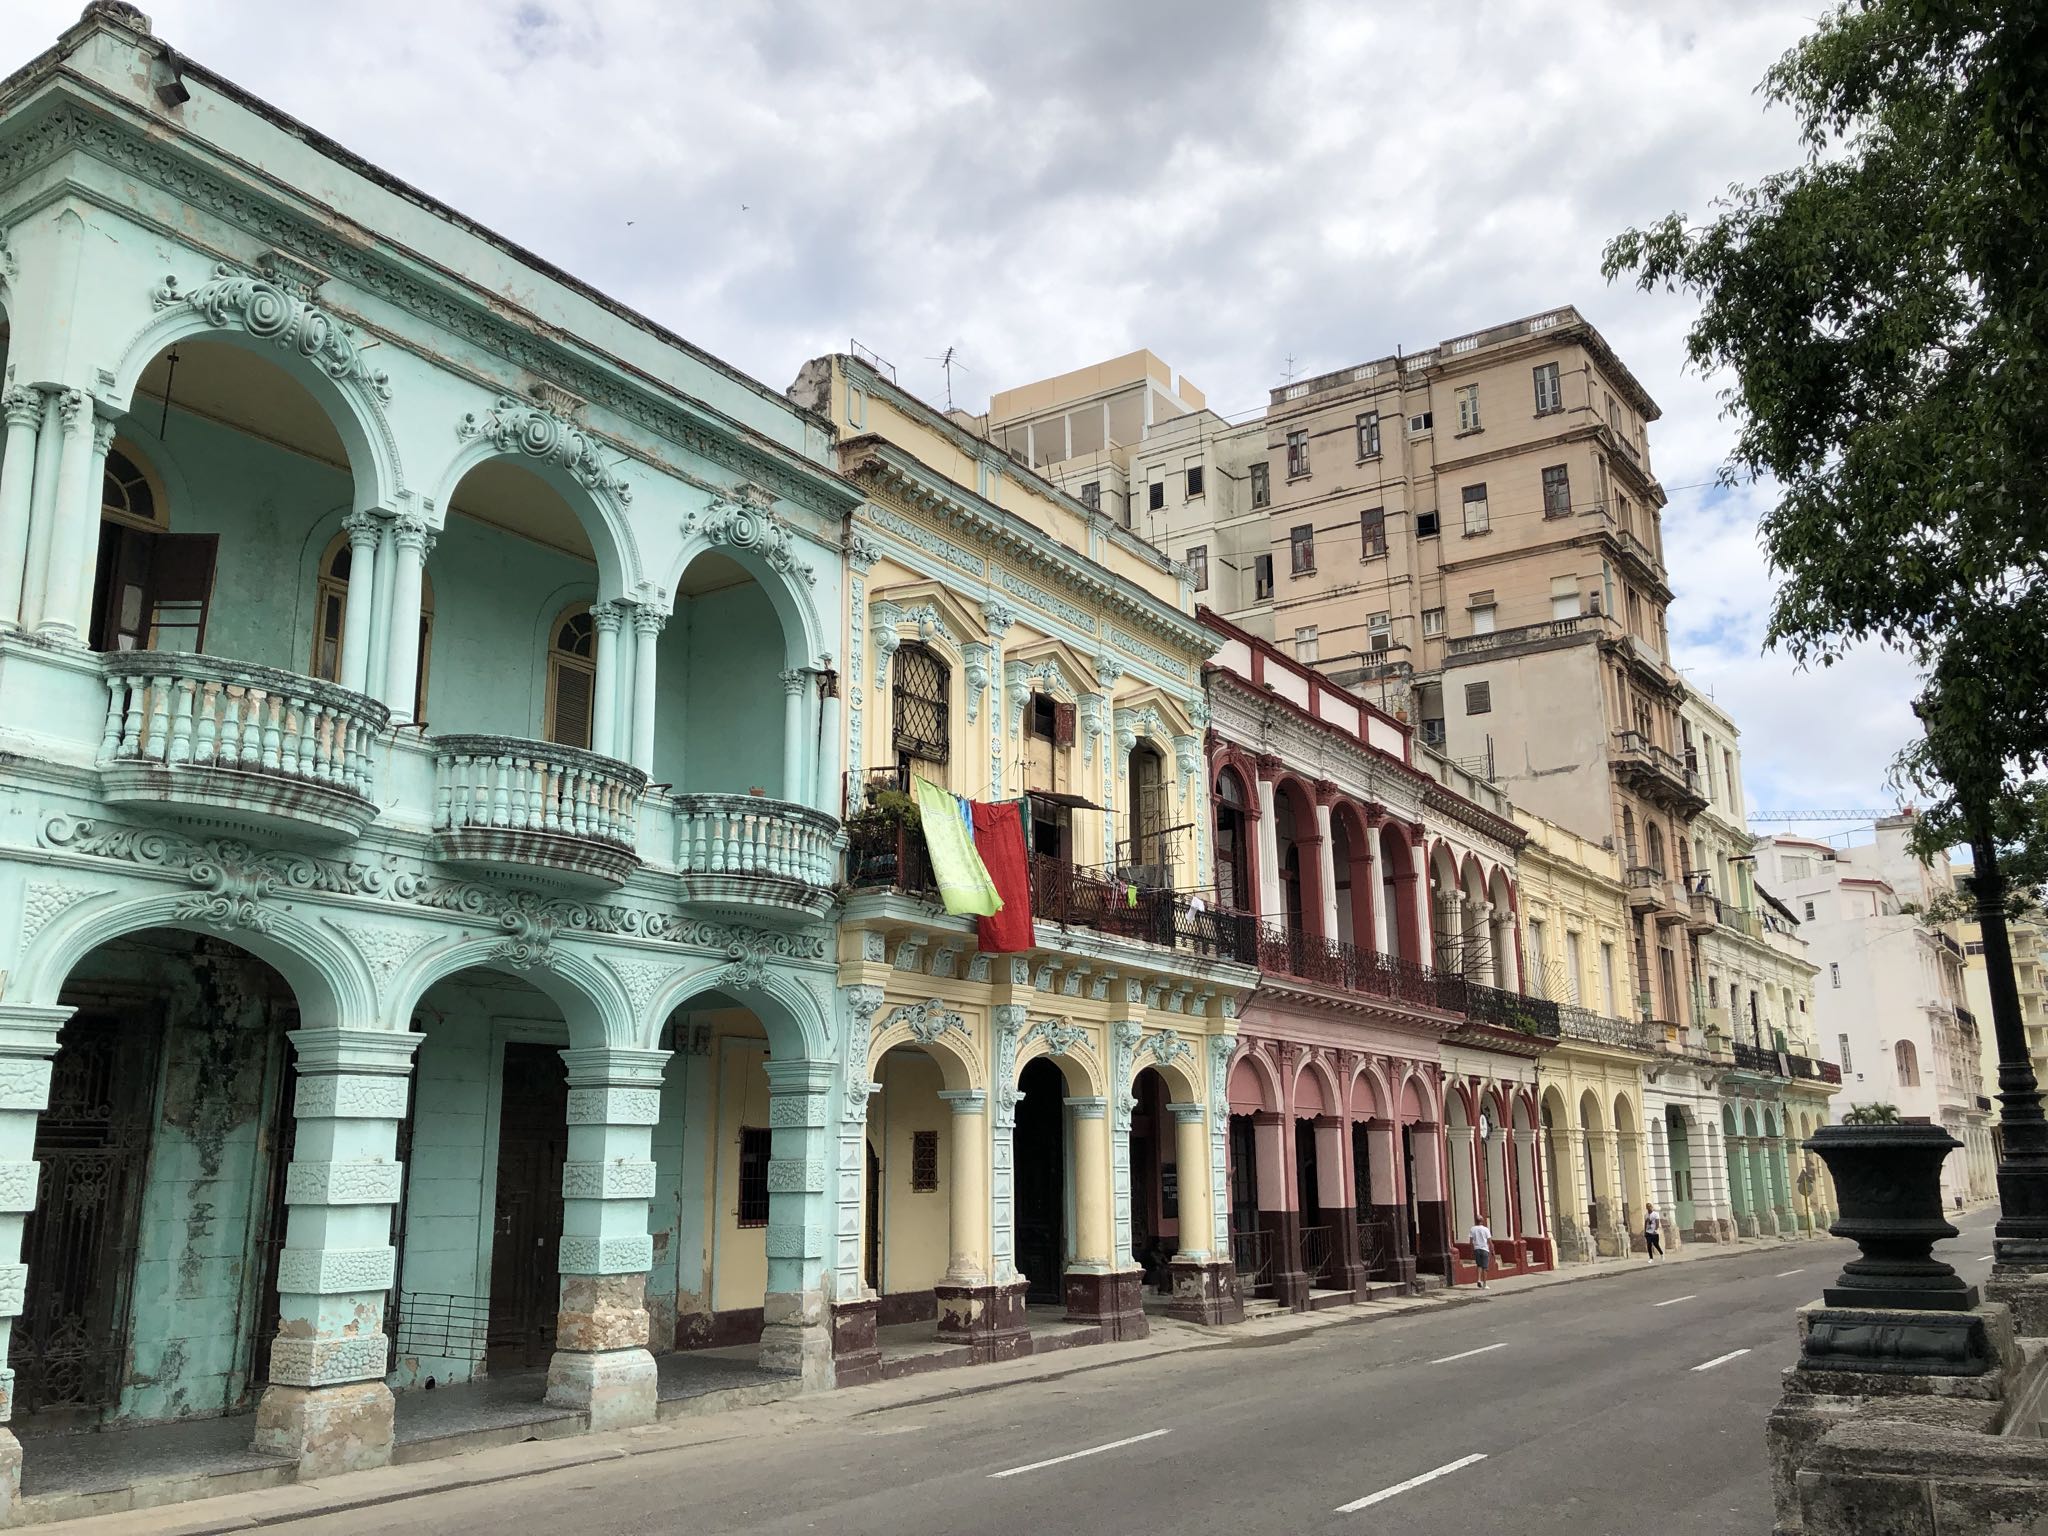 Photo 26 of 221 from the album Highlights Cuba 2019.